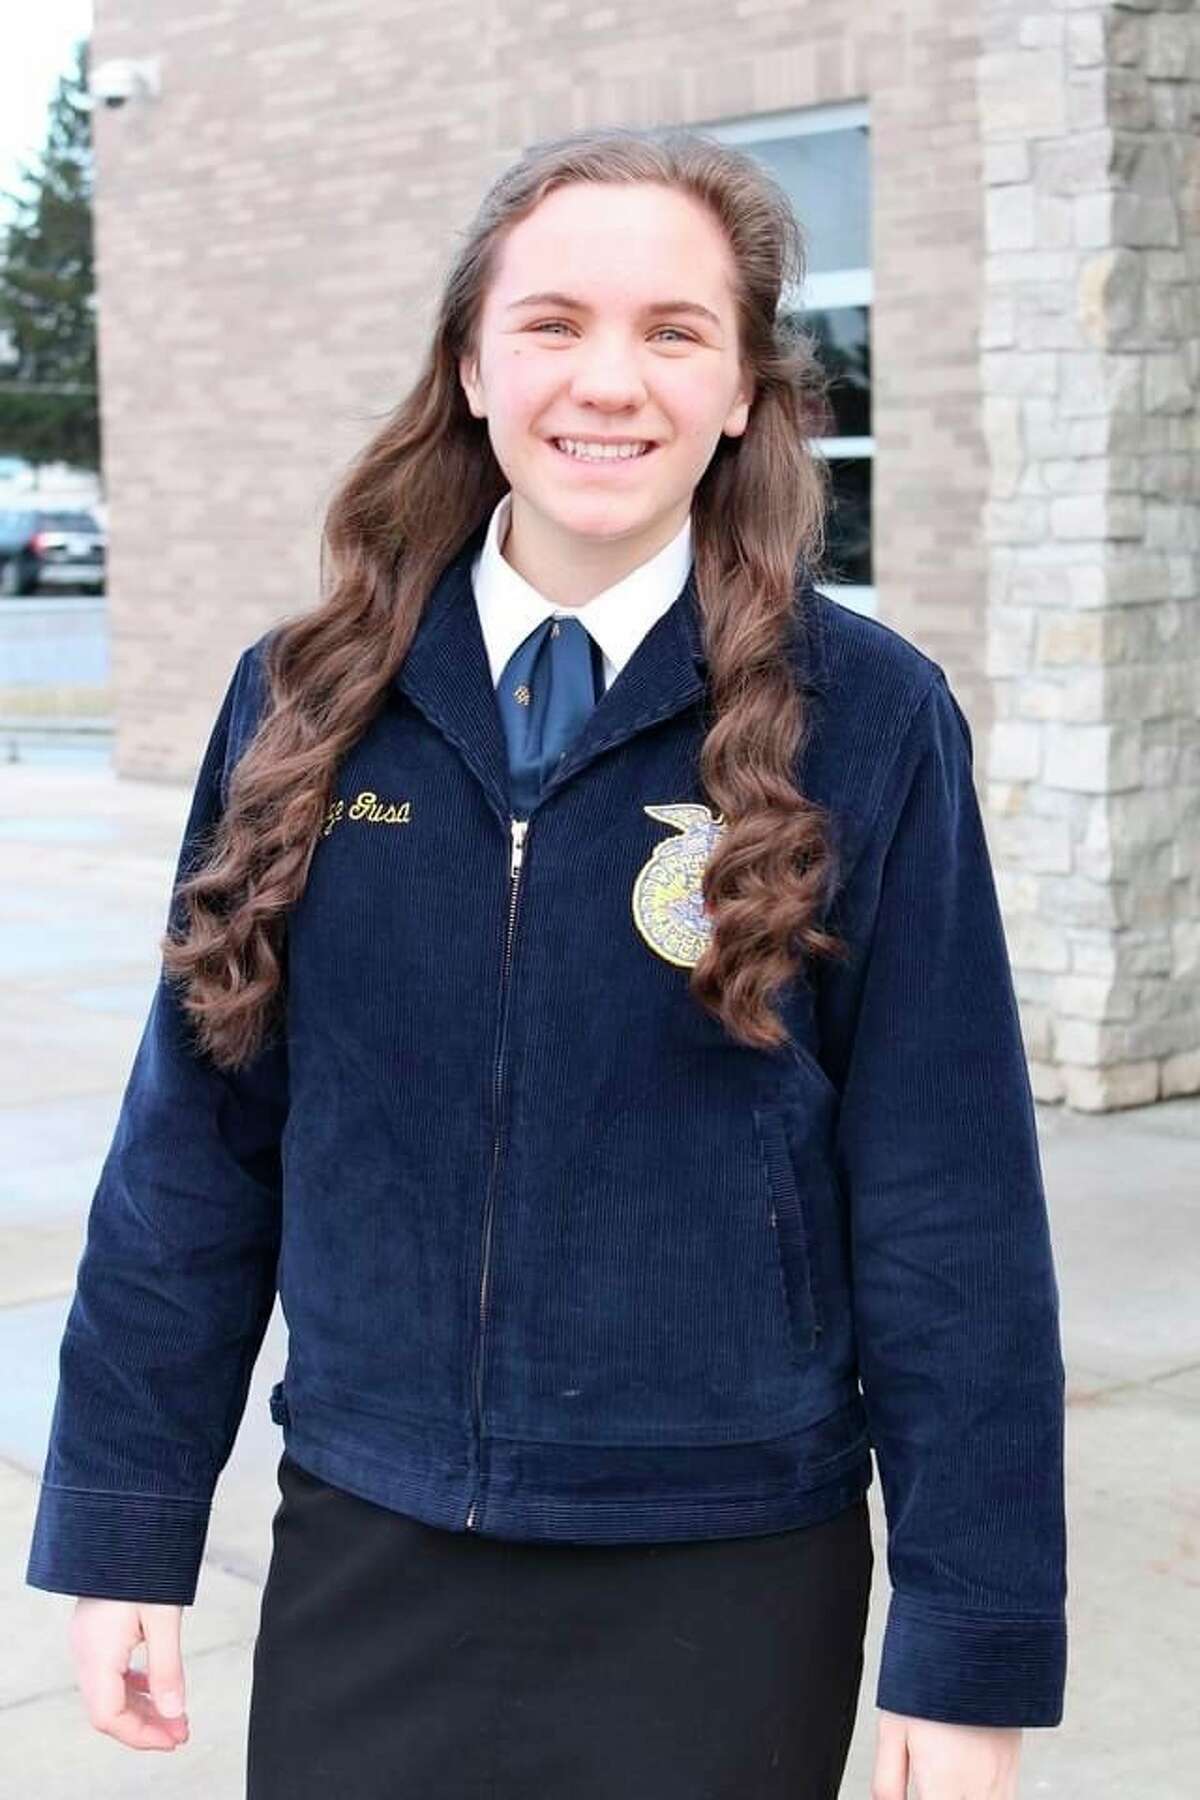 Ubly student Maze Gusa will be competing at a public speaking competition at the National FFA Convention in Indianapolis on Oct. 28. She is the second student from Ubly schools to compete at the national level. (Ubly Community Schools/Courtesy Photo)